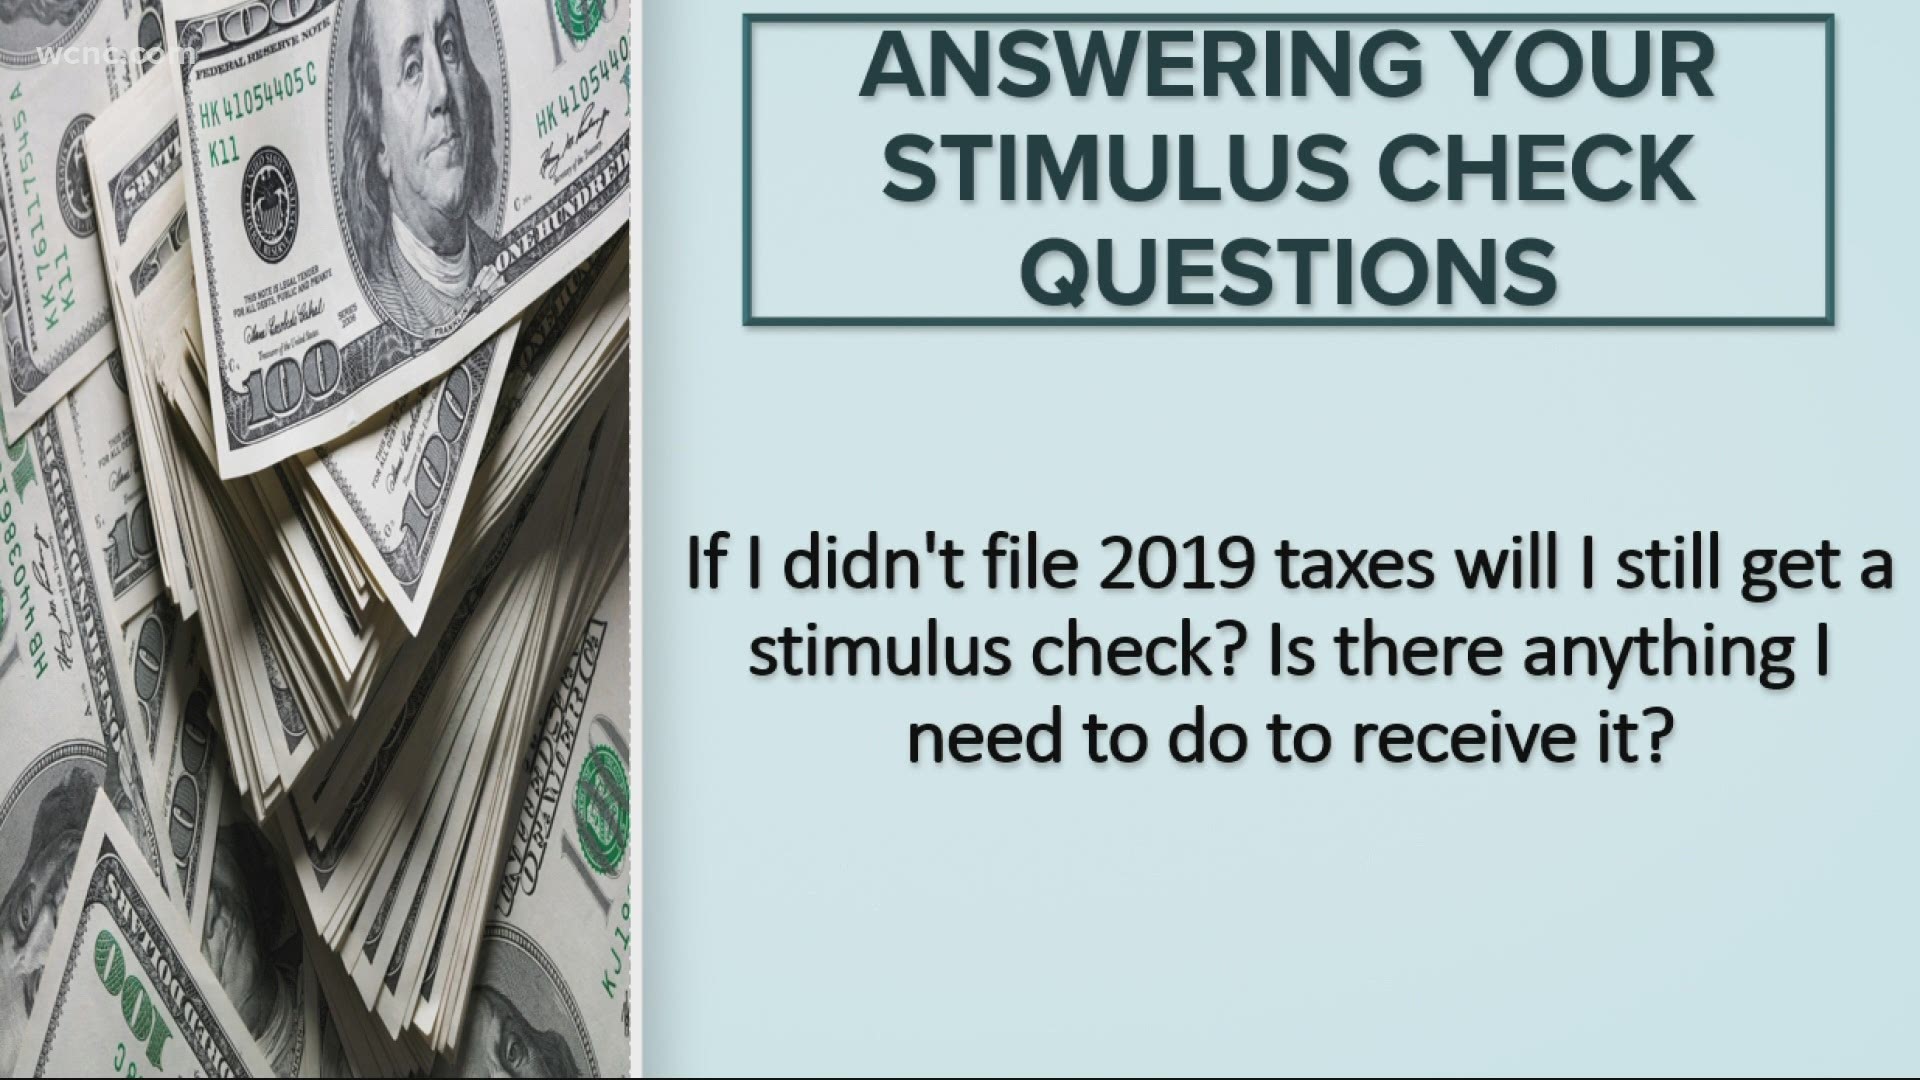 If you didn't file 2019 taxes, will you still get a check?